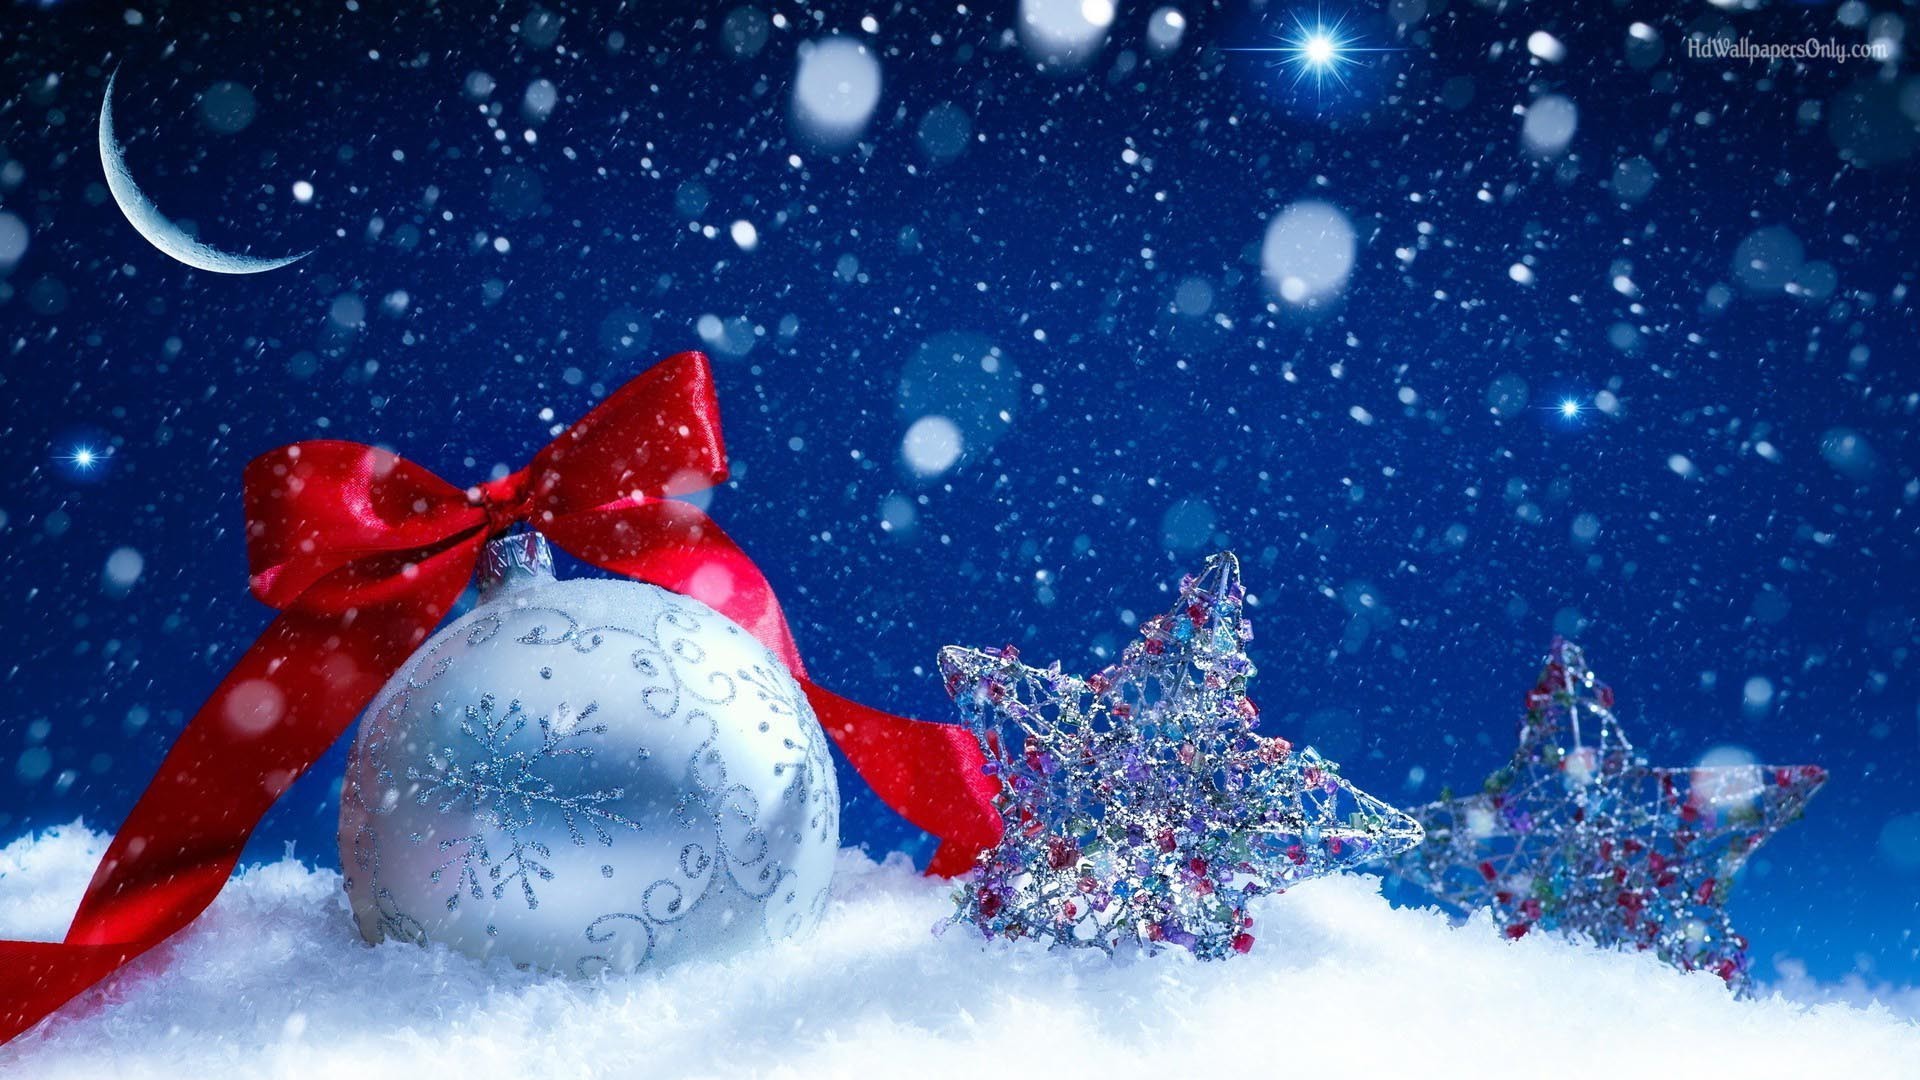 1920x1080 winter christmas backgrounds - Google Search